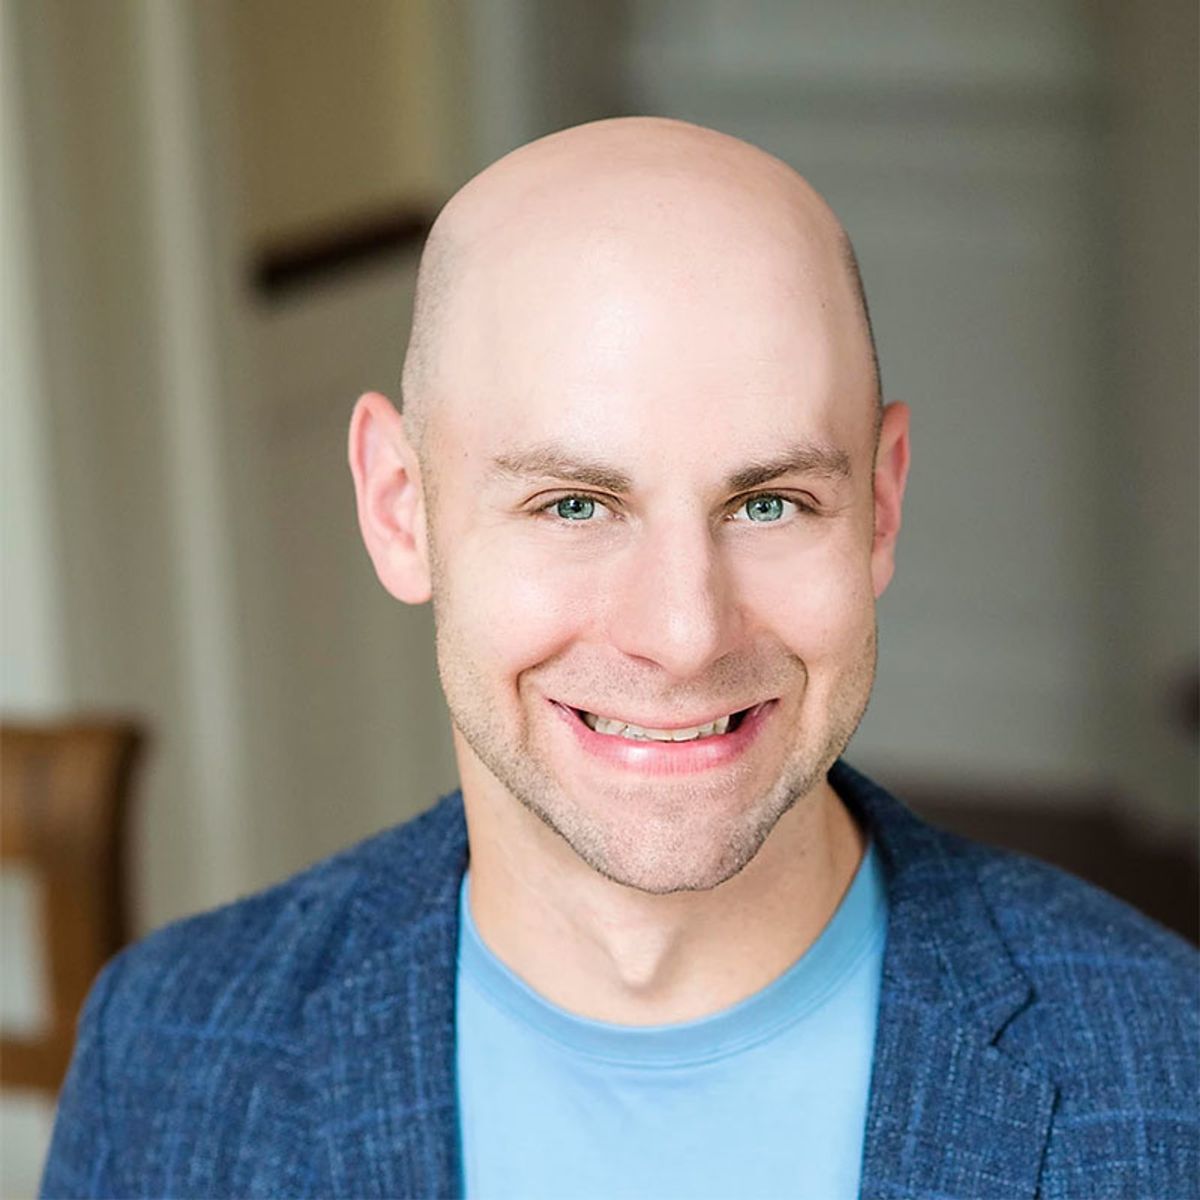 Brit Interviews Adam Grant About Managing Productivity and Anxiety